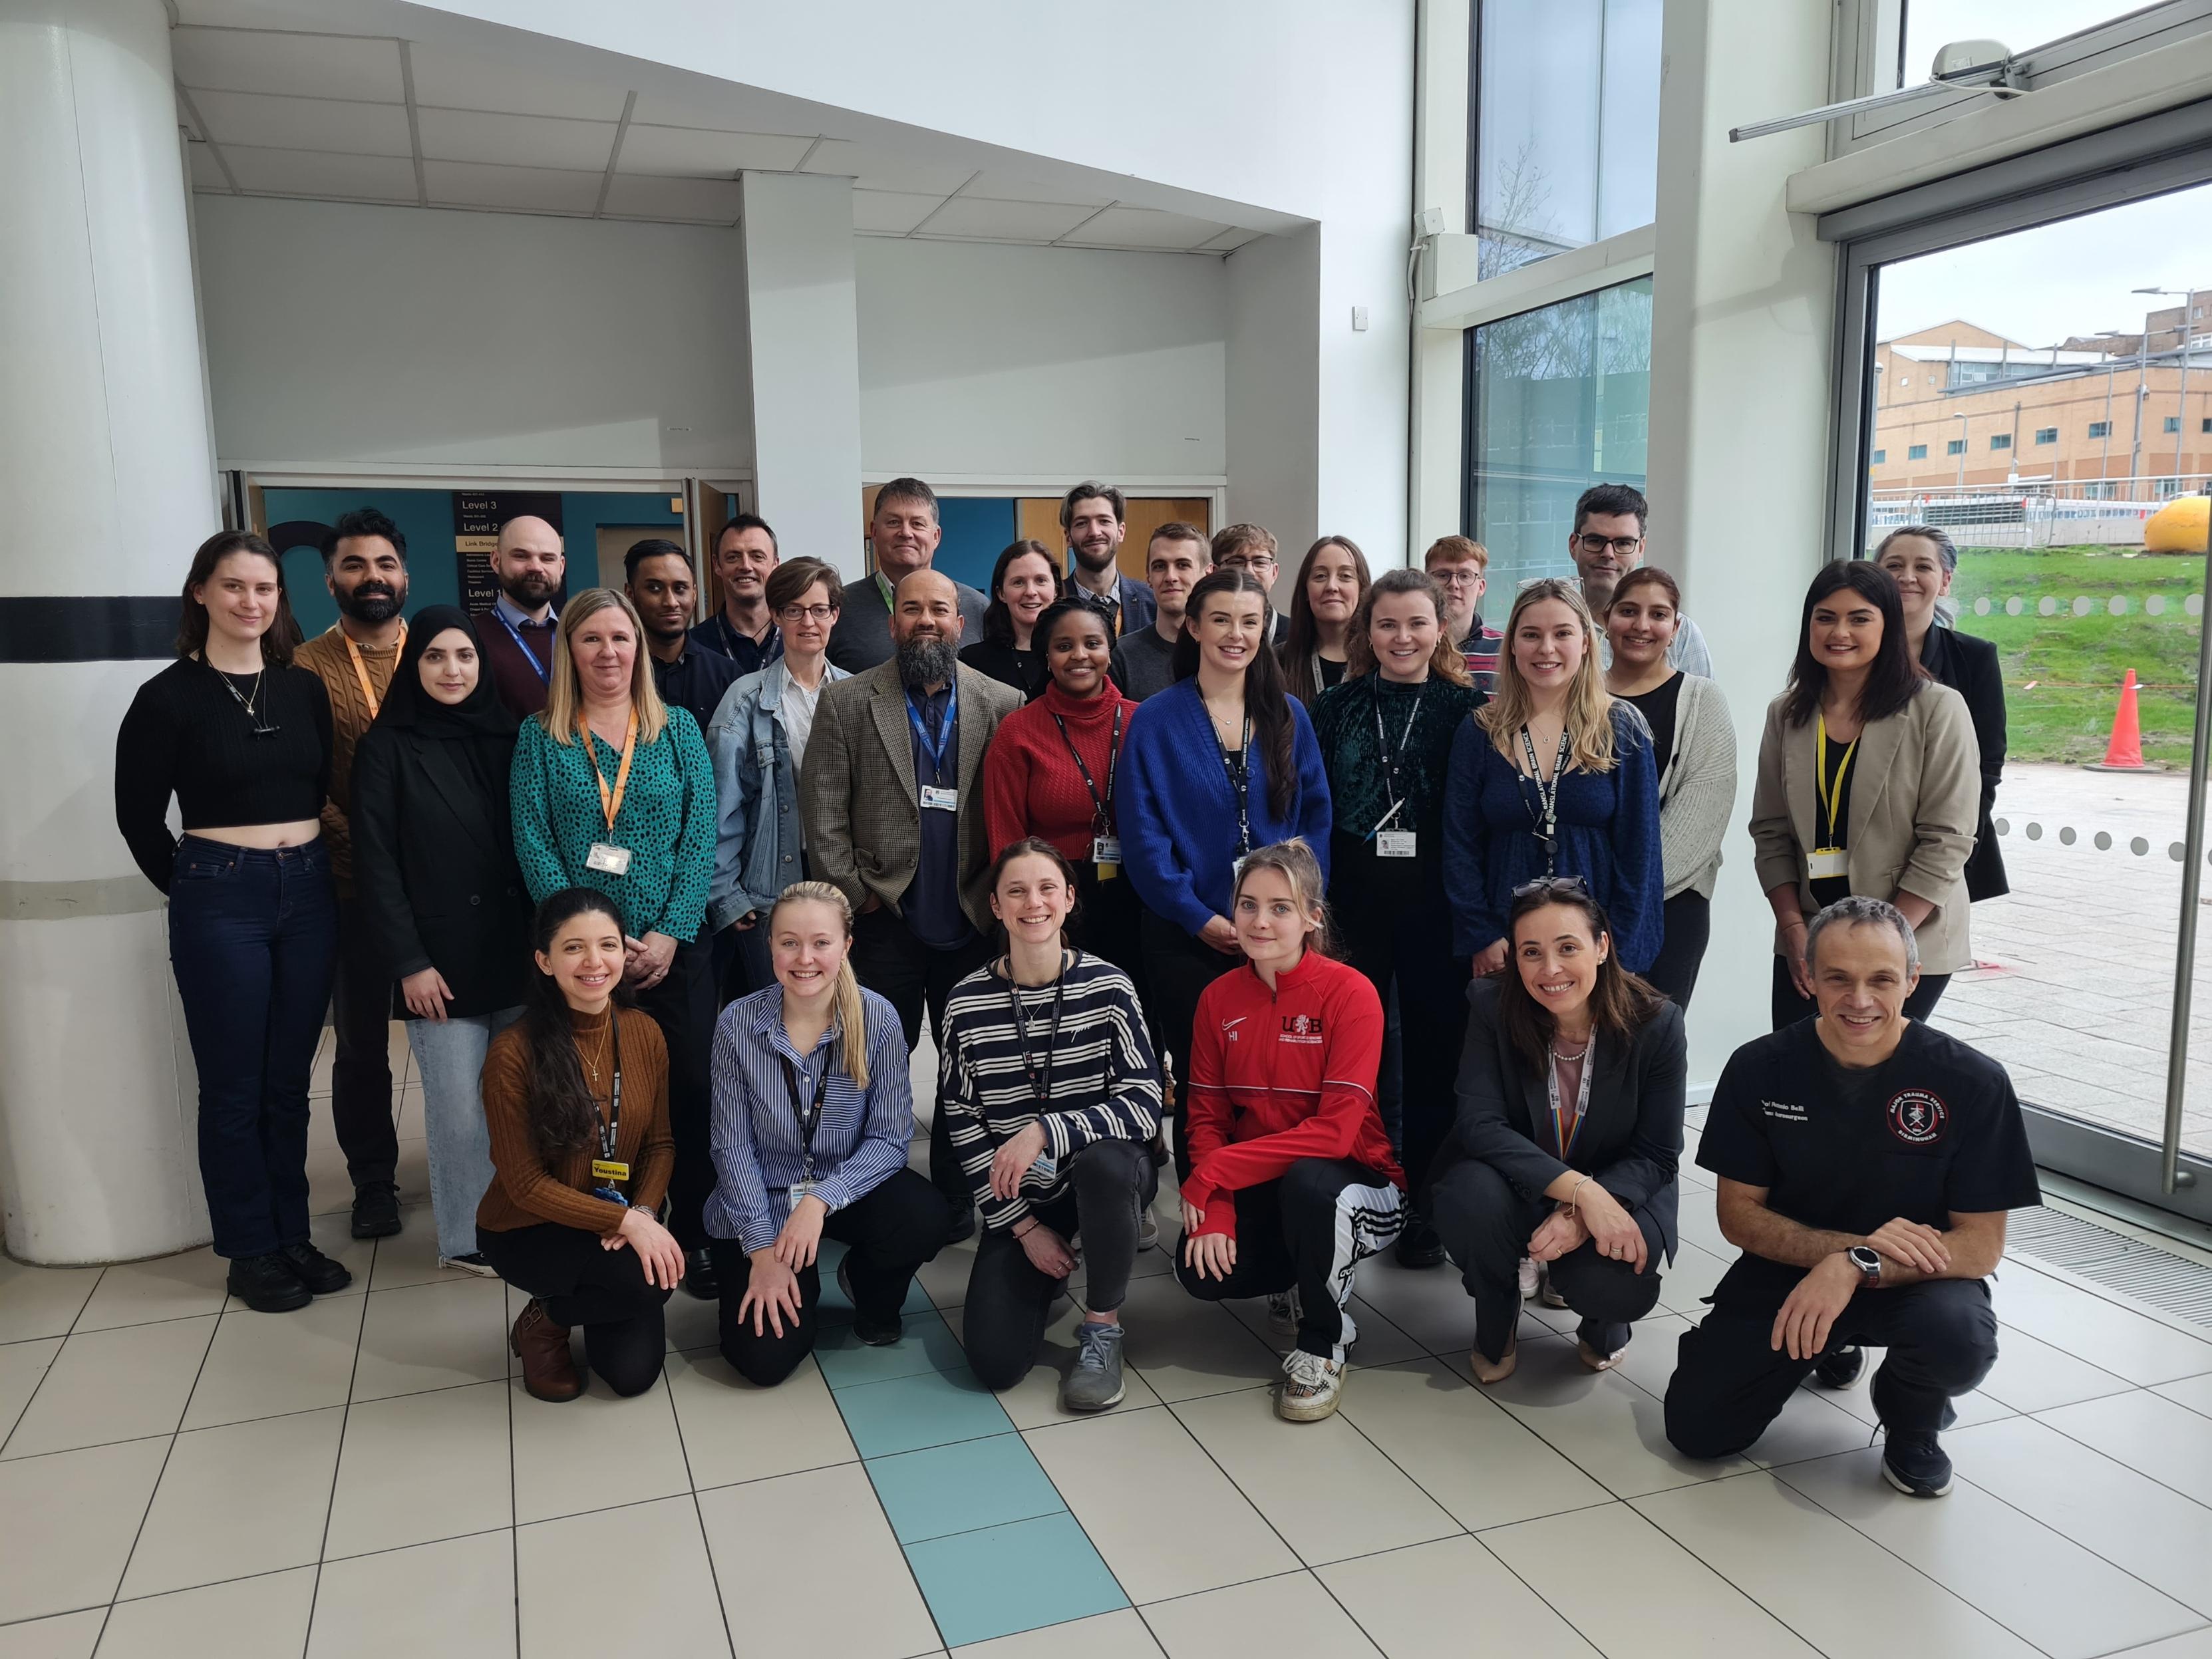 Brain researchers from across the University of Birmingham pose for group photo.